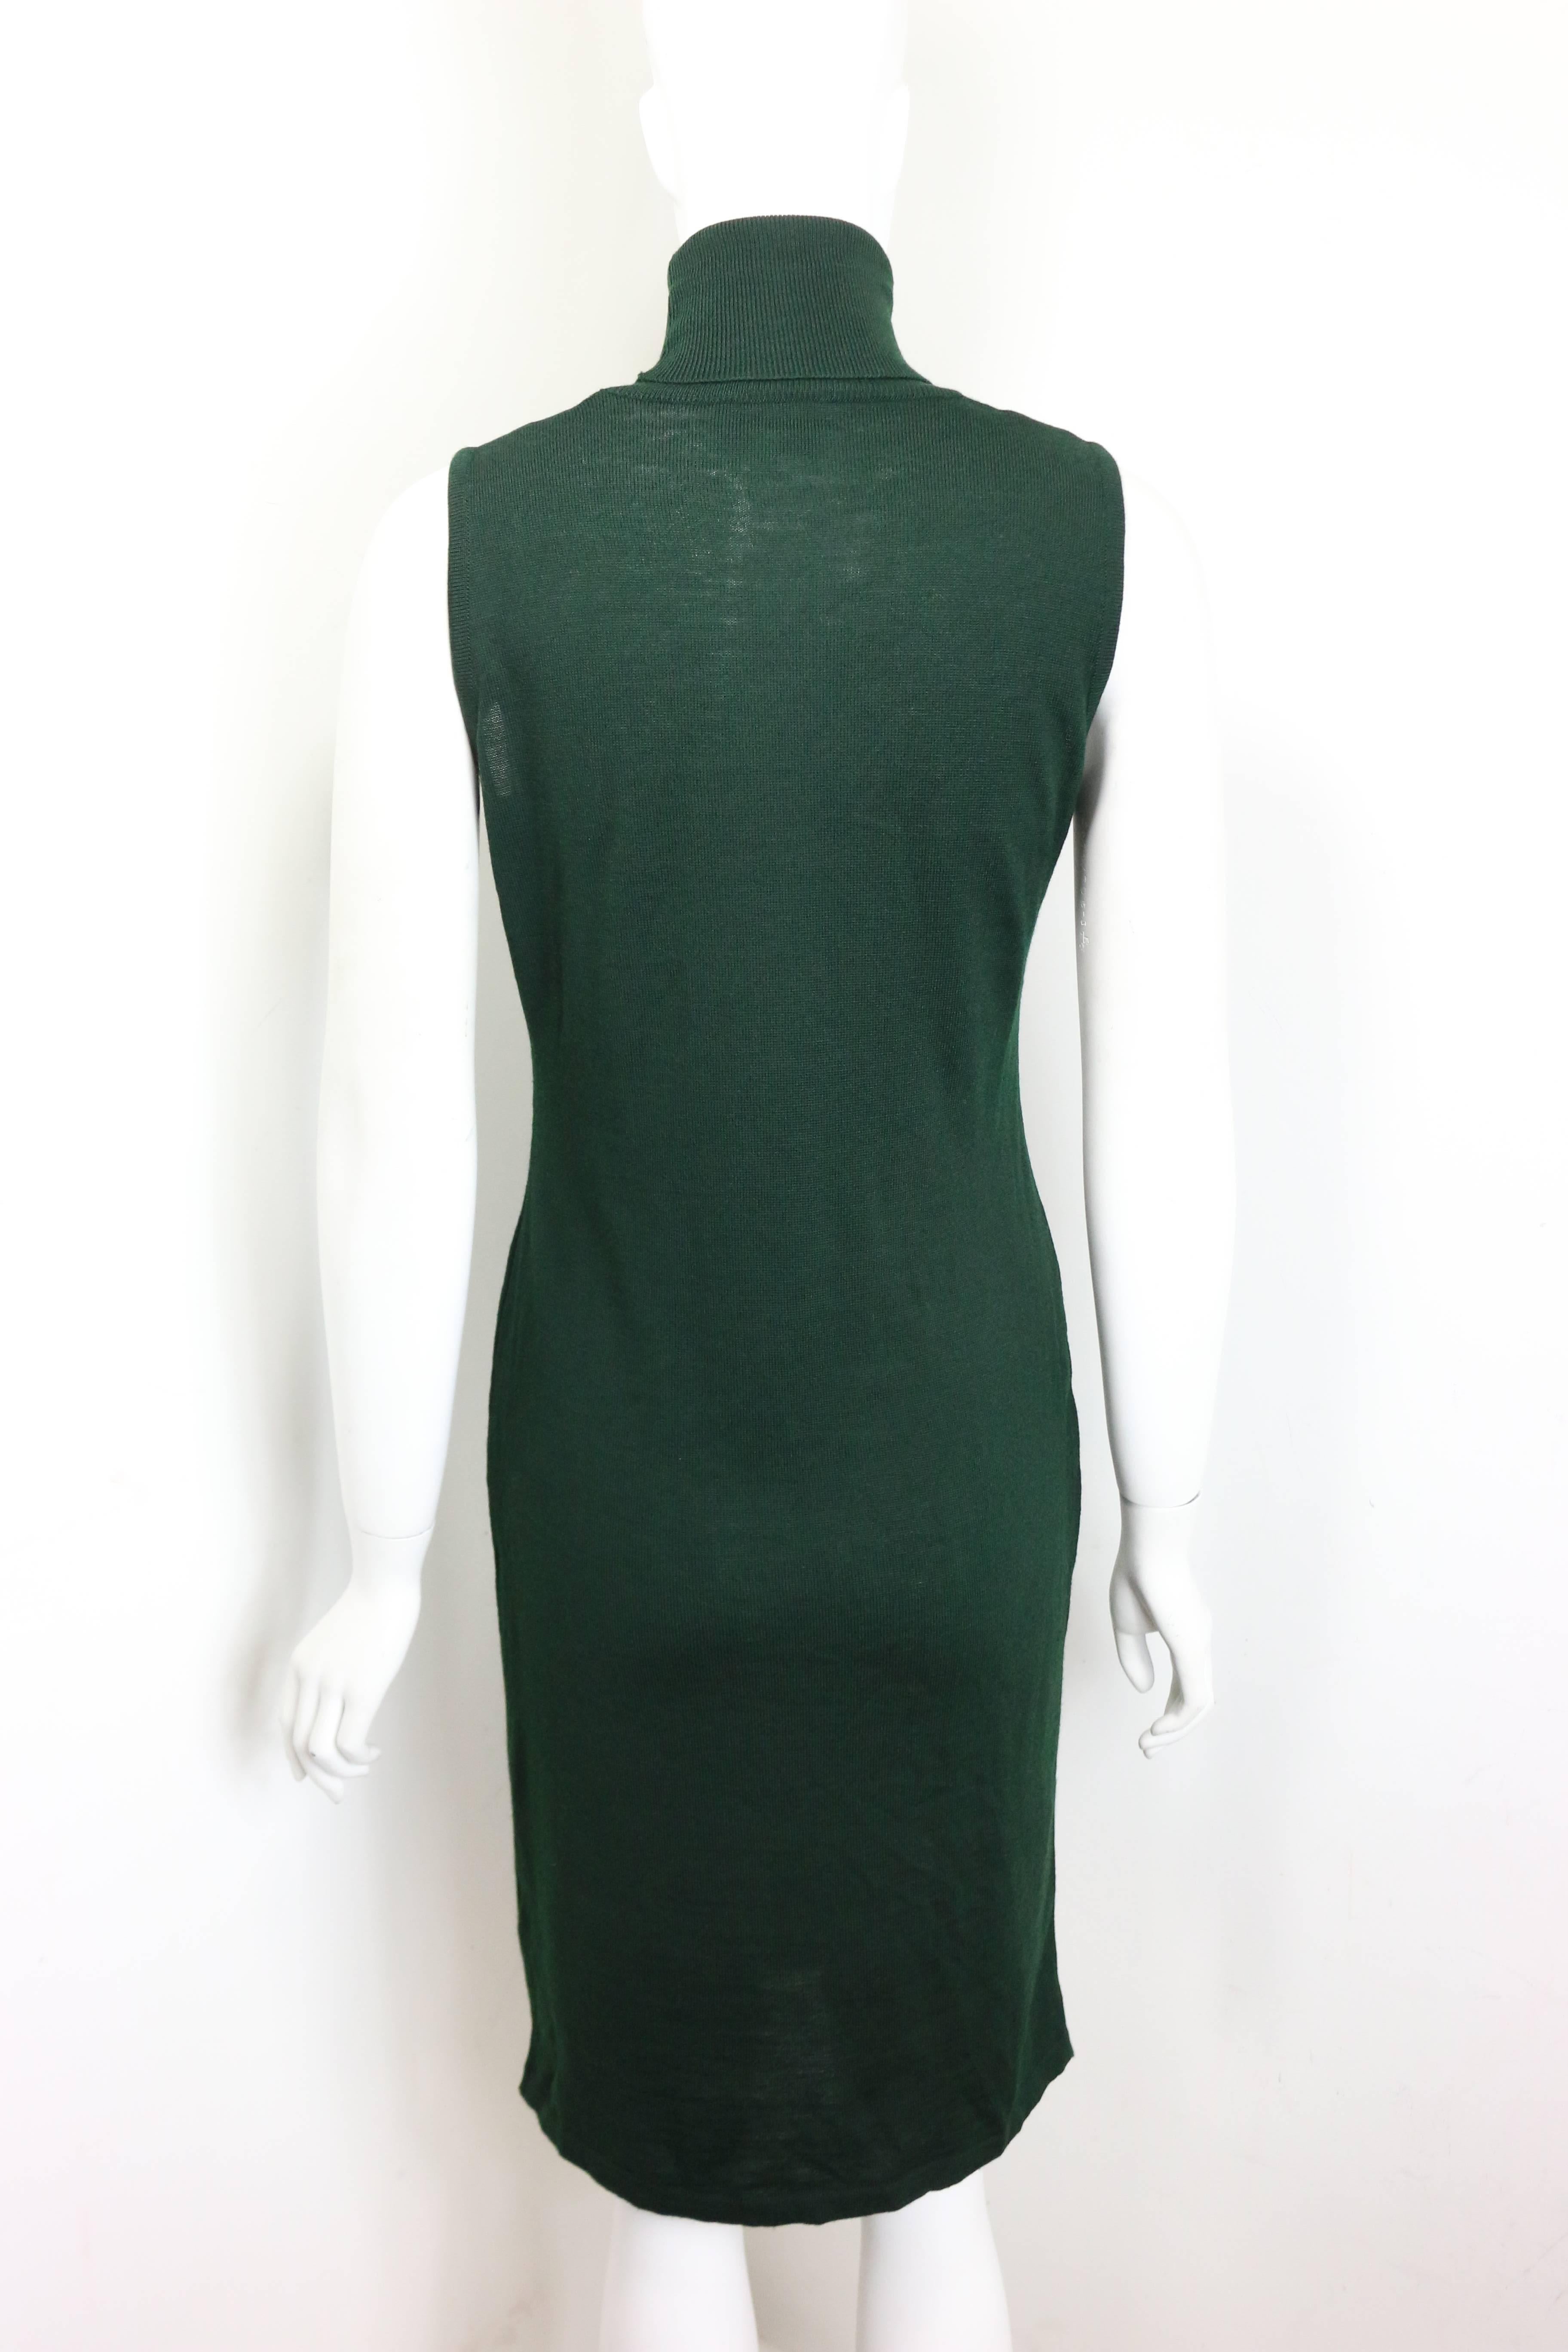 - Vintage 90s Versace Jeans Couture green wool sleeveless turtle neck dress. This simple and classic dark green dress is subtle for day time or an evening night out. 

- Made in Italy.

- Size M. 

- Shoulder: 11 inches. Bust: 28 inches. Height: 39